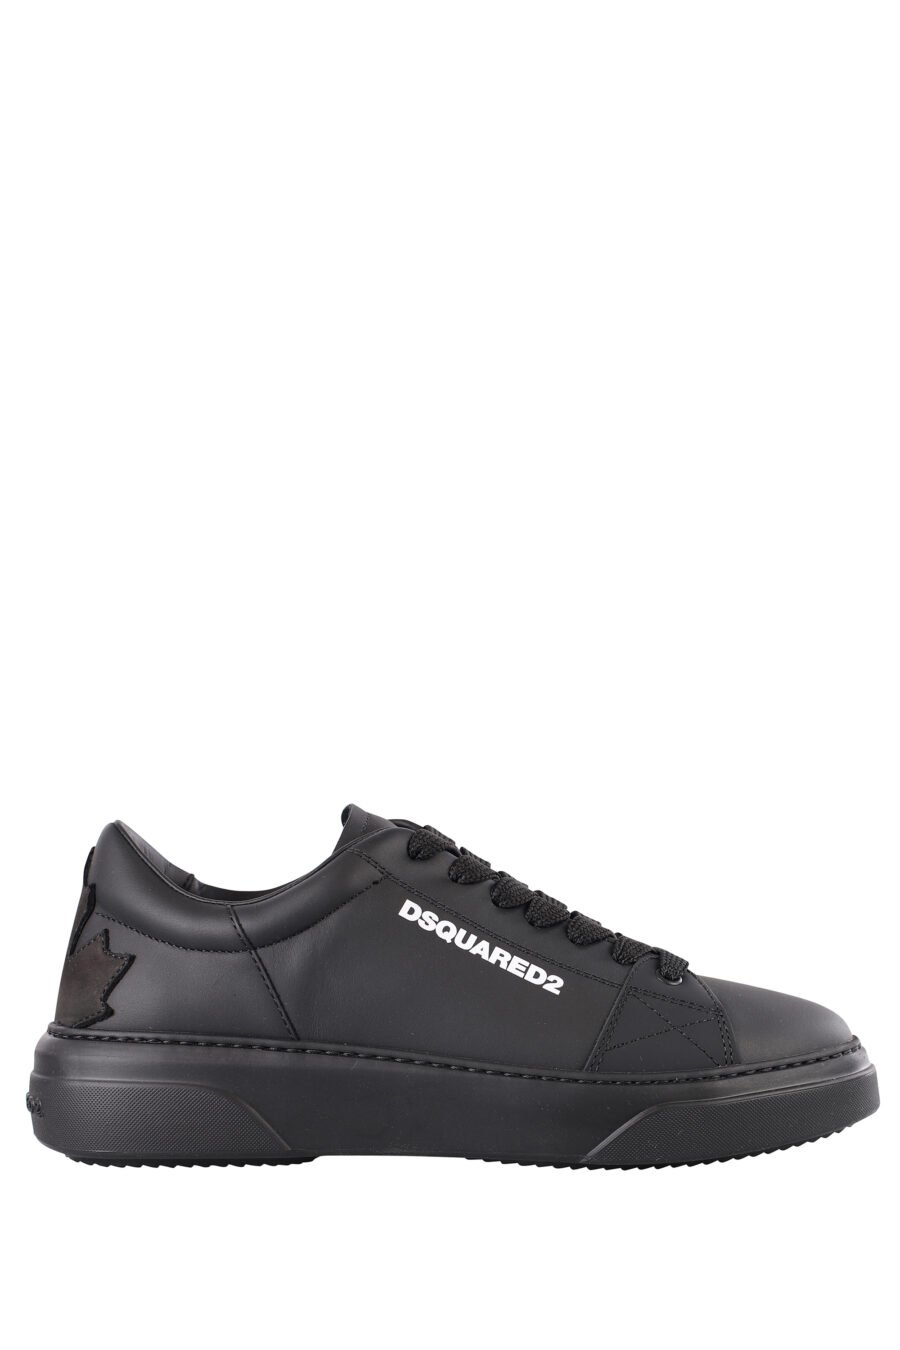 Black trainers with small white logo and black sole - IMG 1148